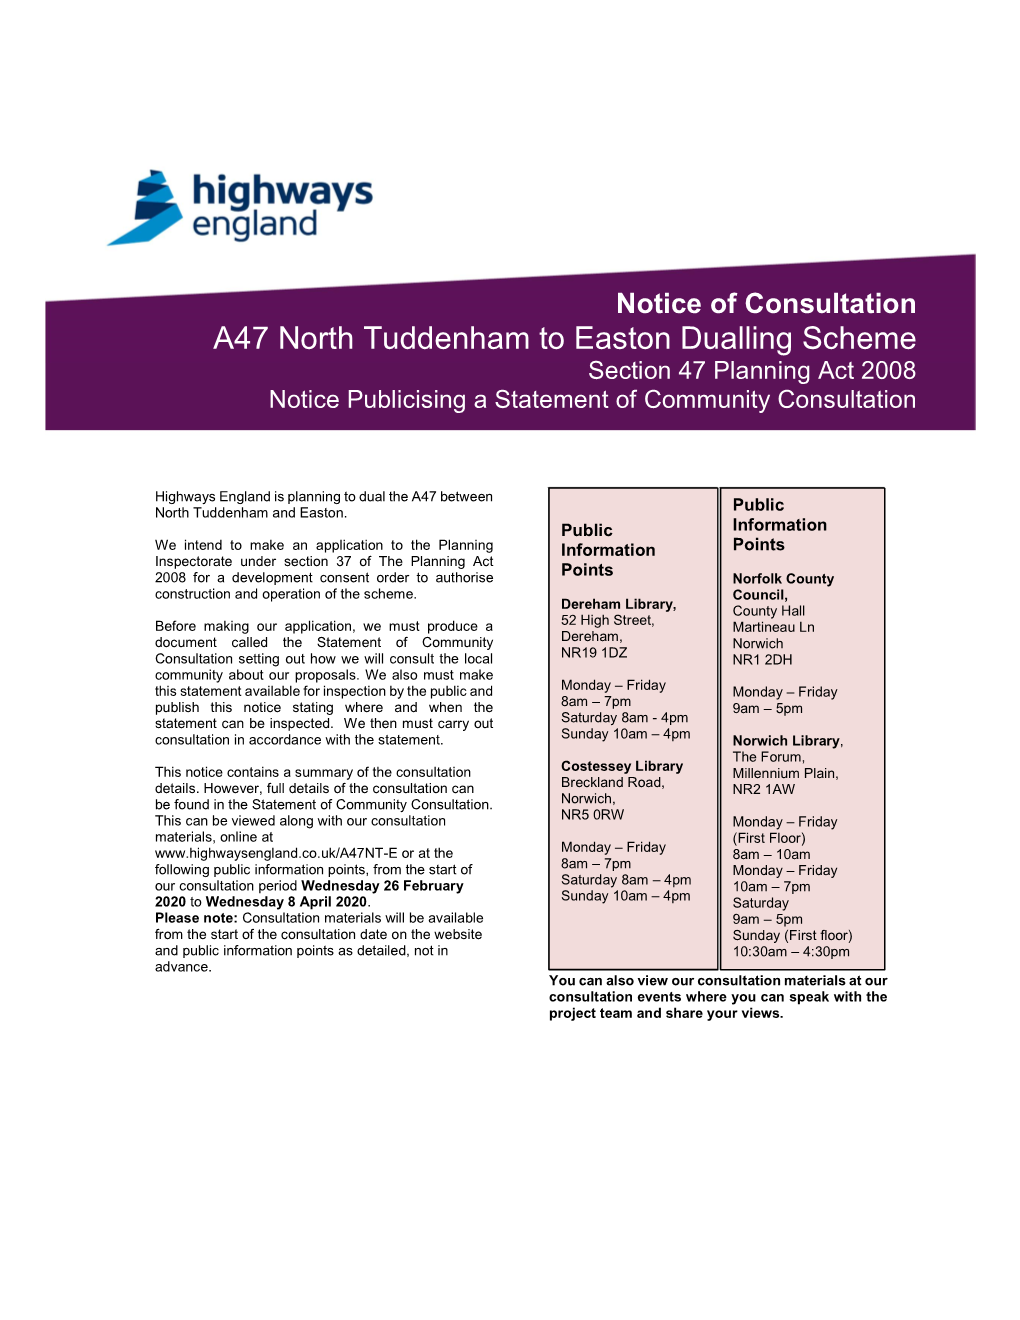 A47 North Tuddenham to Easton Dualling Scheme Section 47 Planning Act 2008 Notice Publicising a Statement of Community Consultation